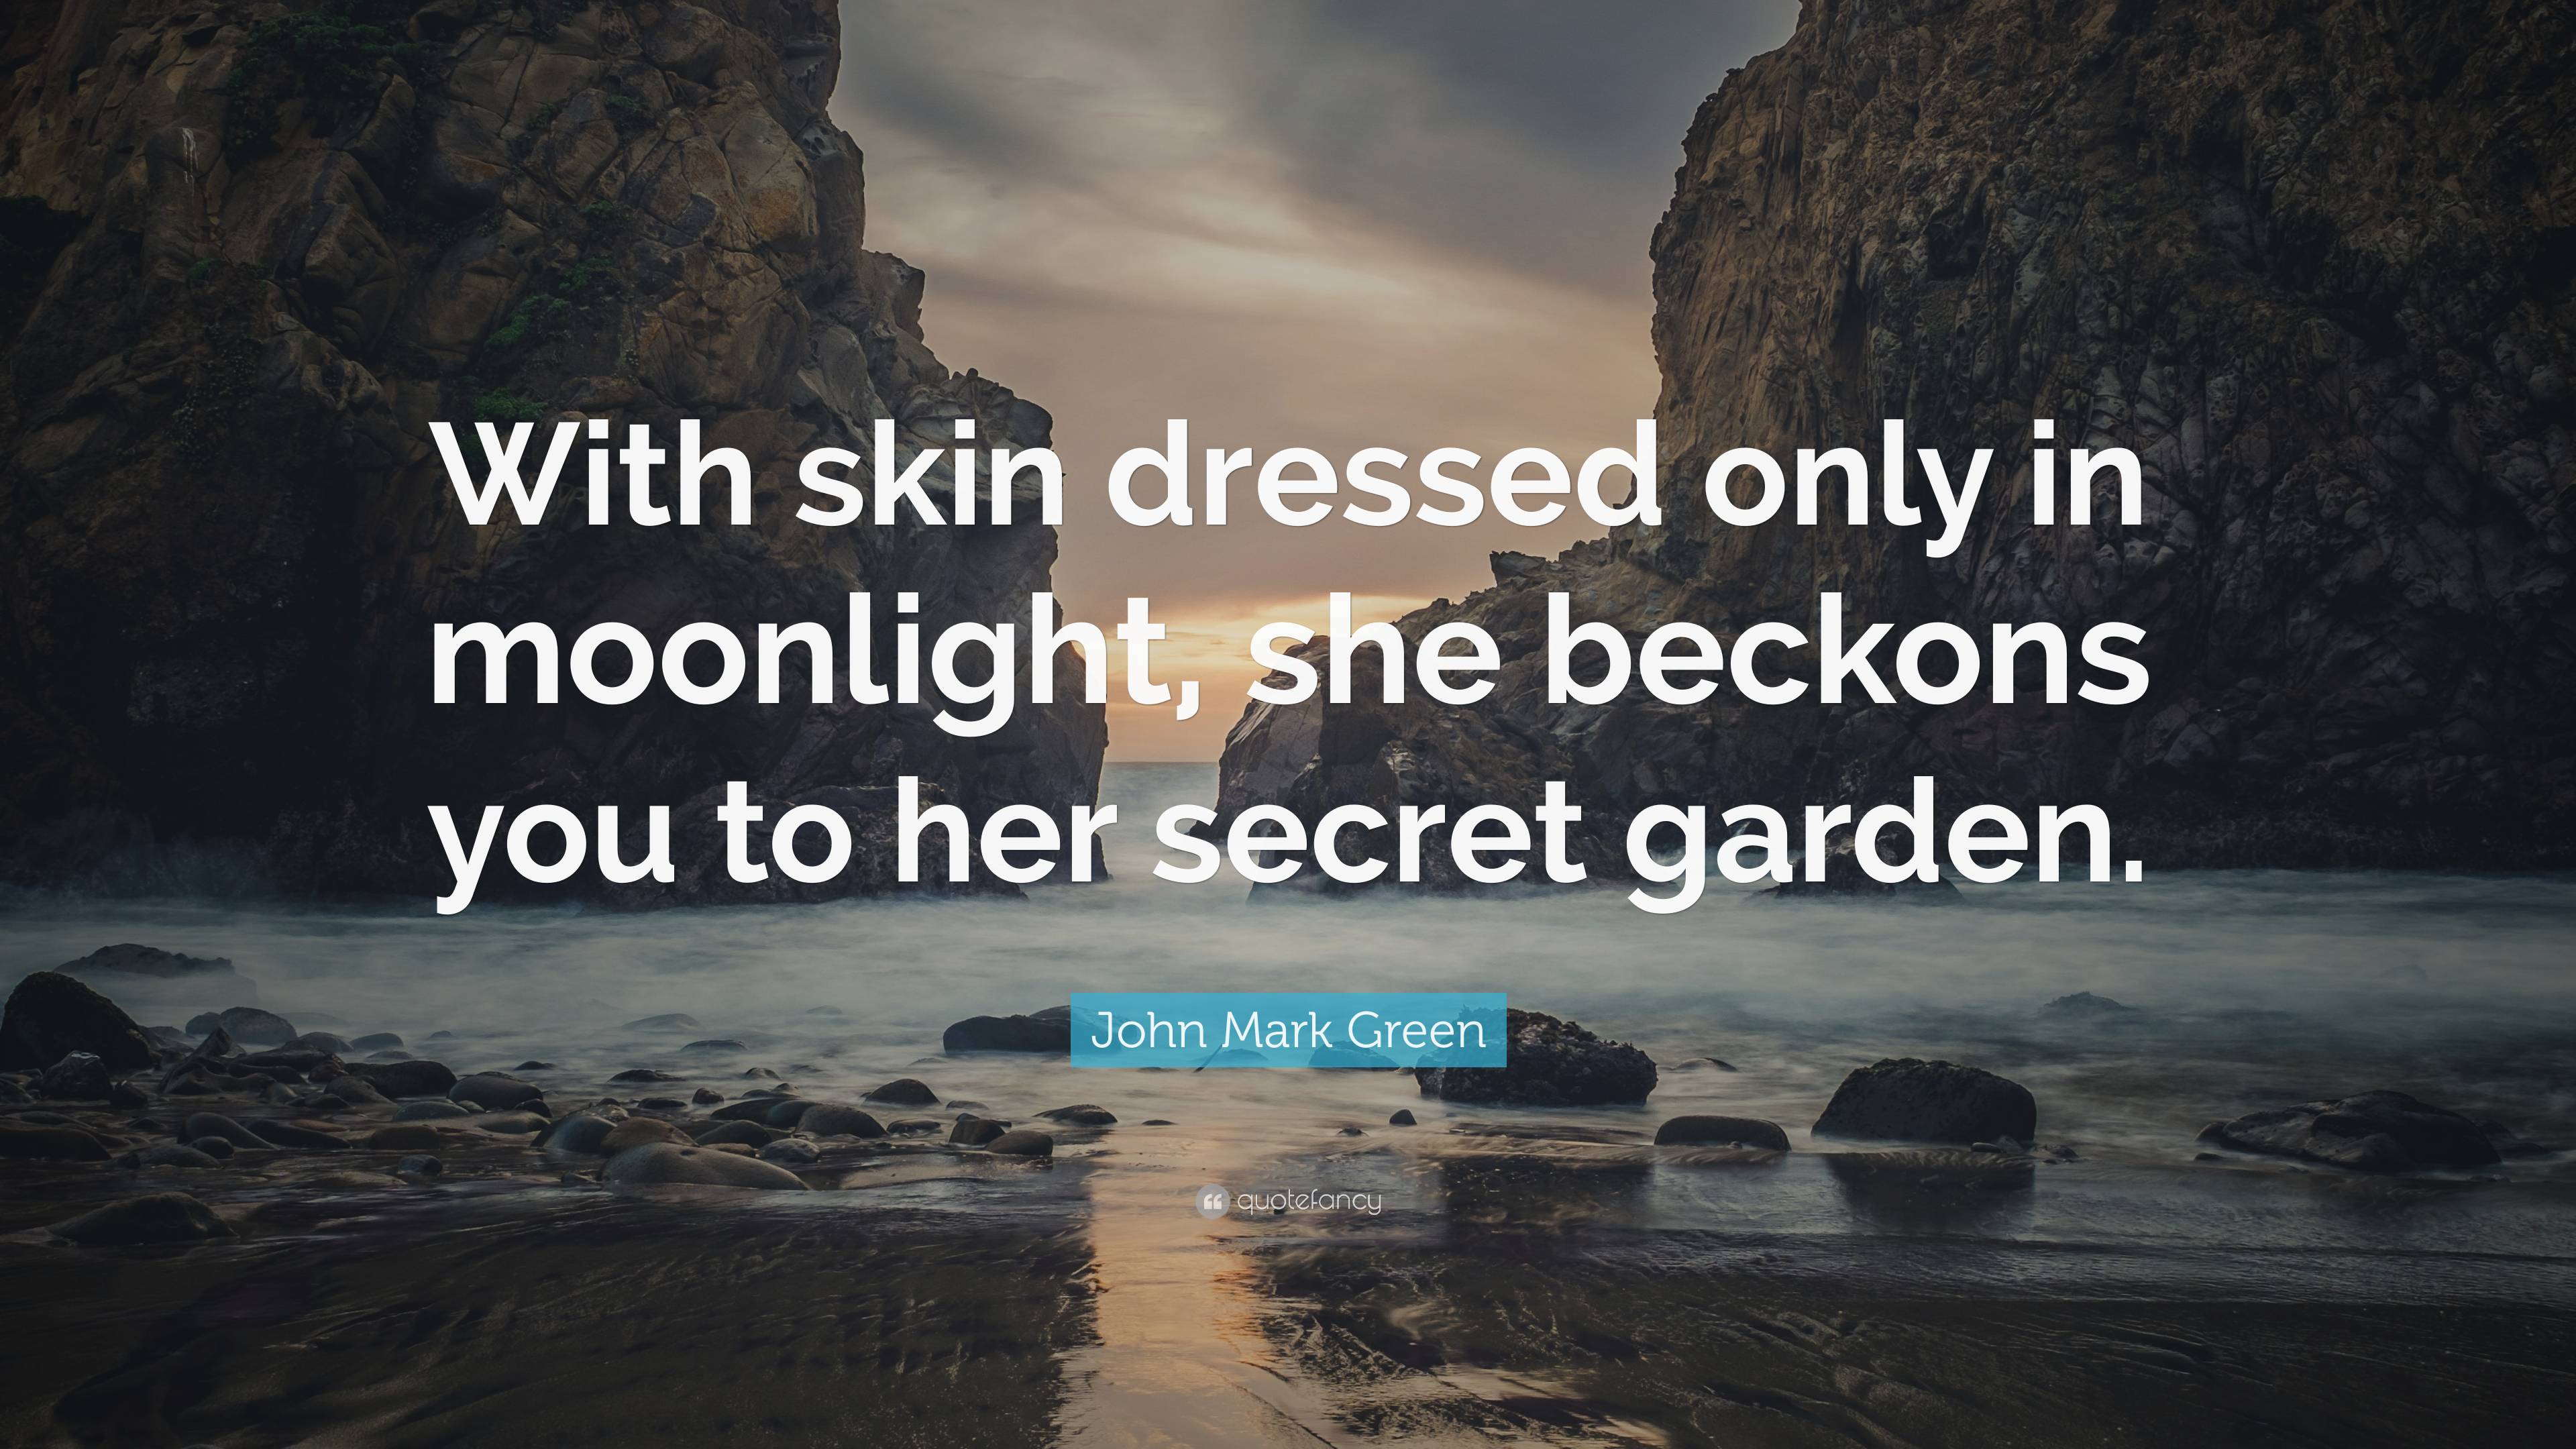 https://quotefancy.com/media/wallpaper/3840x2160/7206830-John-Mark-Green-Quote-With-skin-dressed-only-in-moonlight-she.jpg